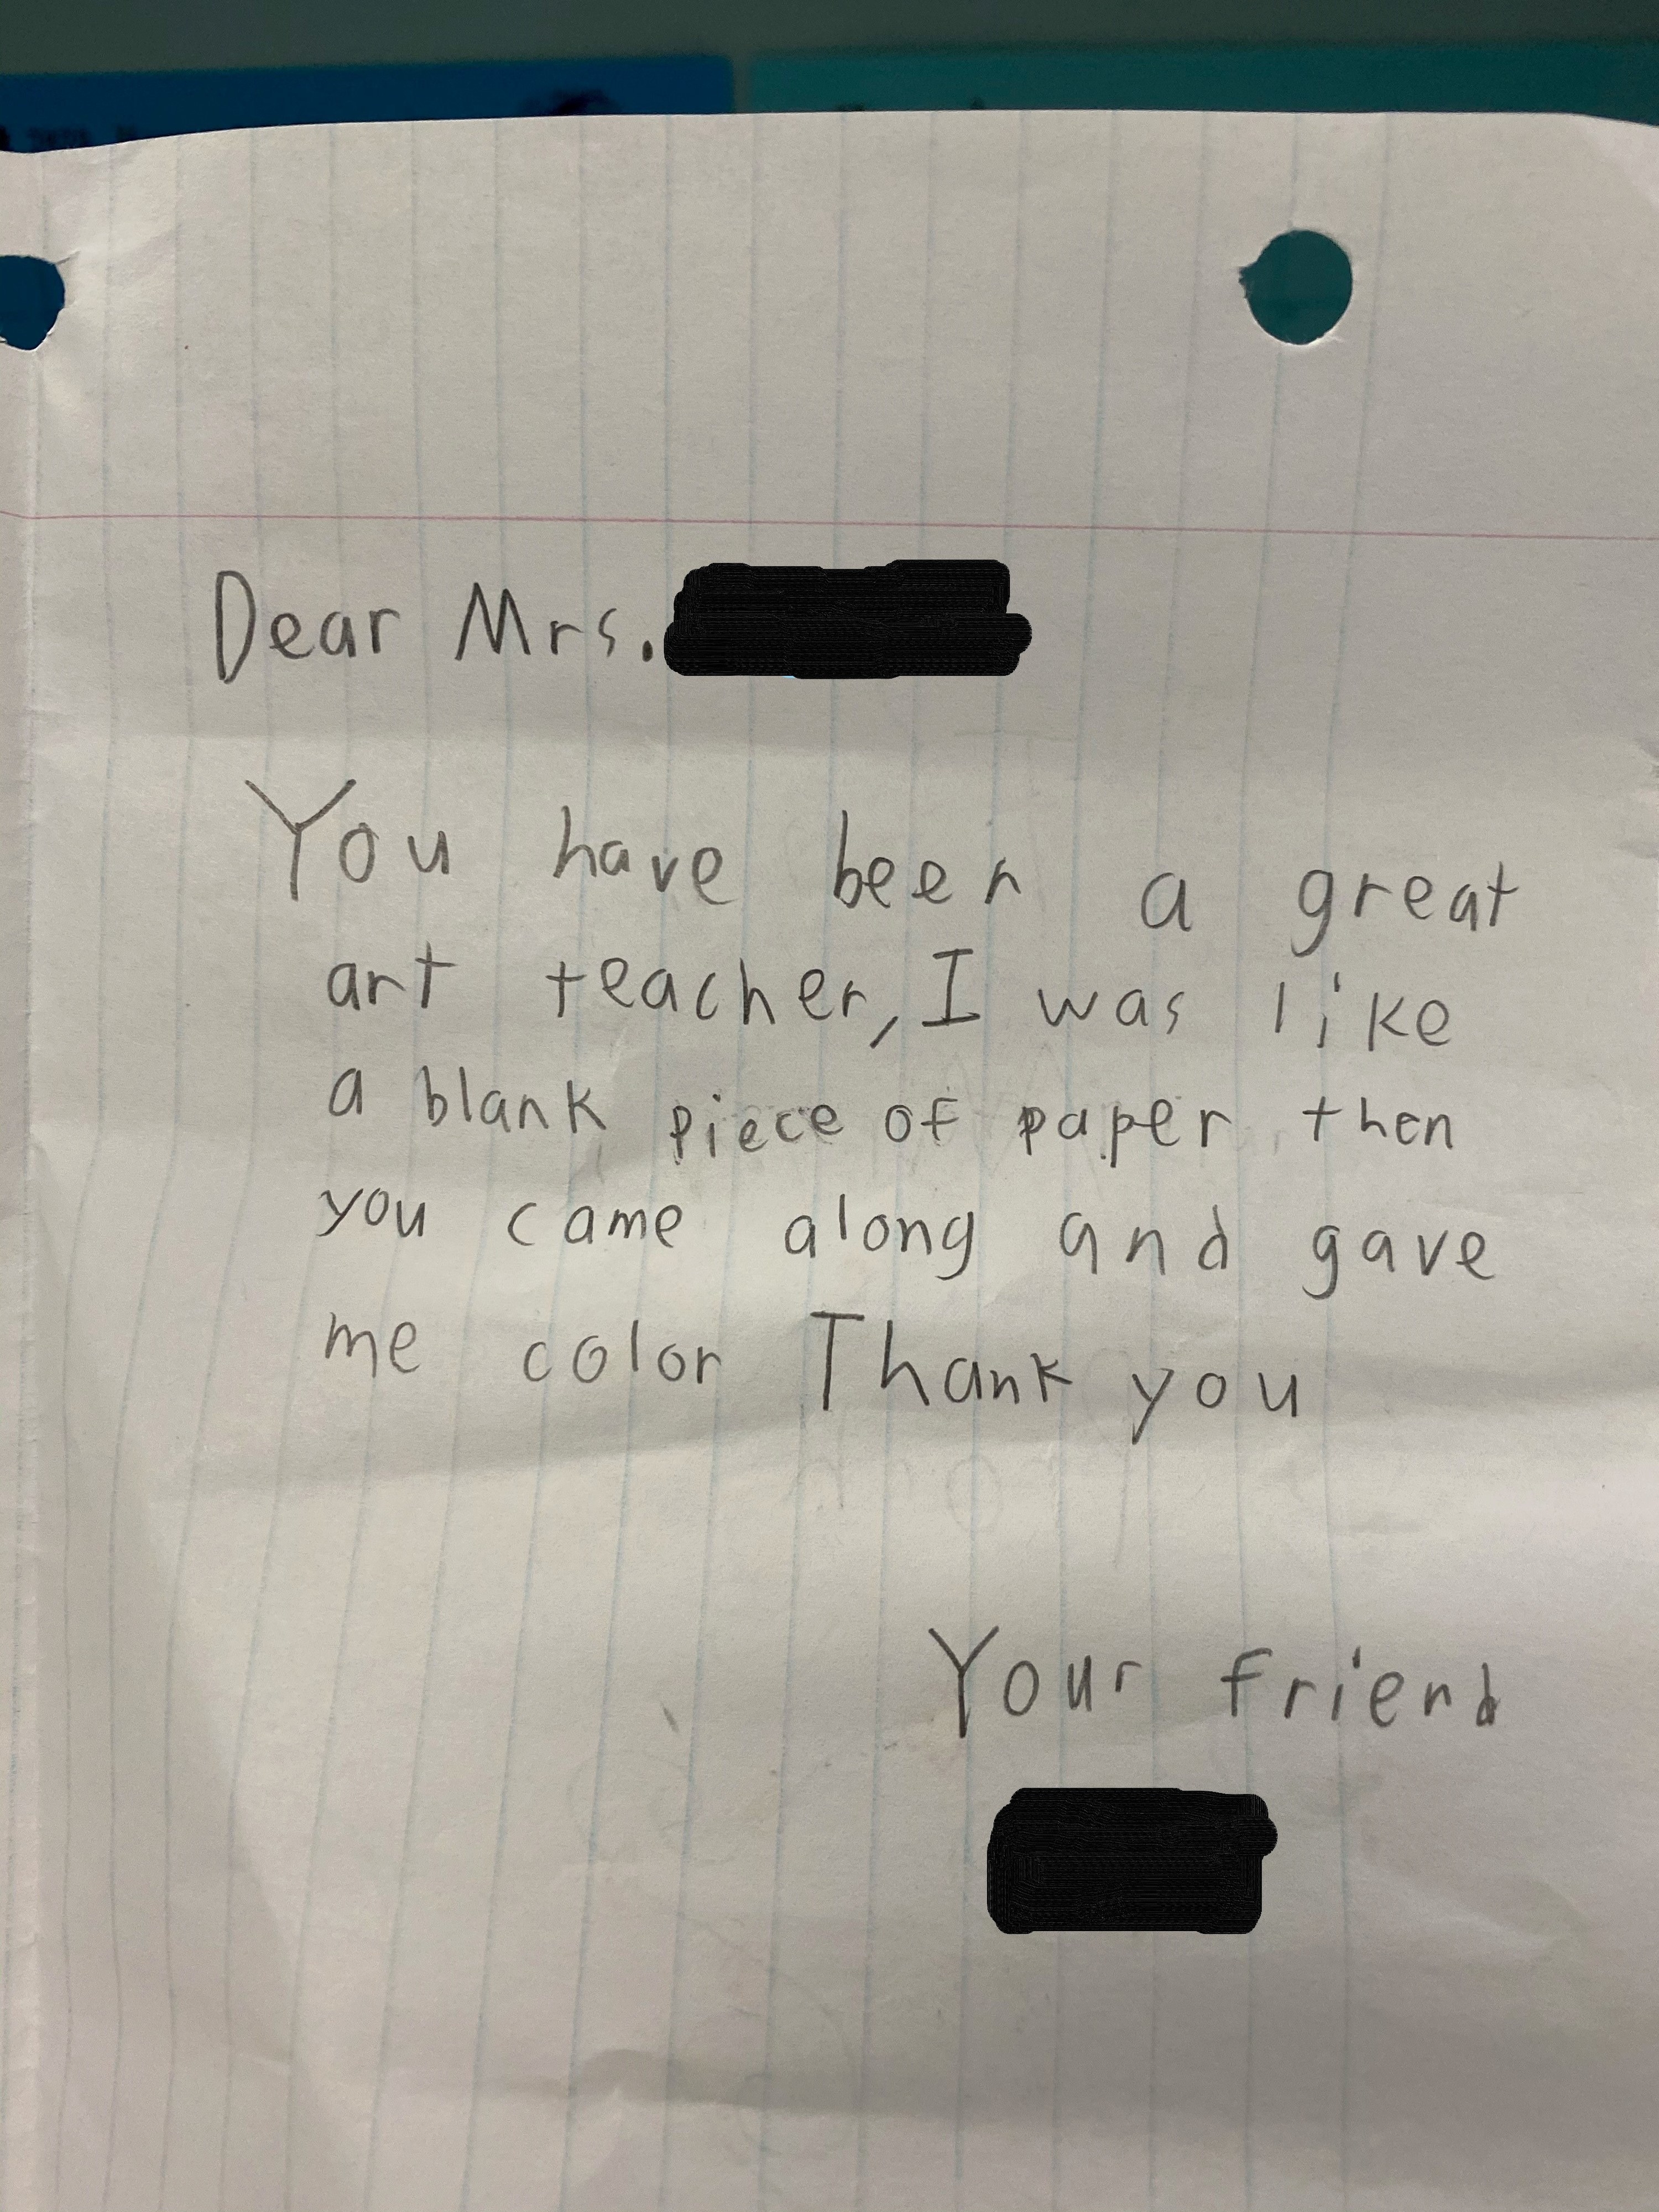 Handwritten note to a teacher: &quot;You have been a great art teacher,  I was like a blank piece of paper then you came along and gave me color, thank you, your friend&quot;